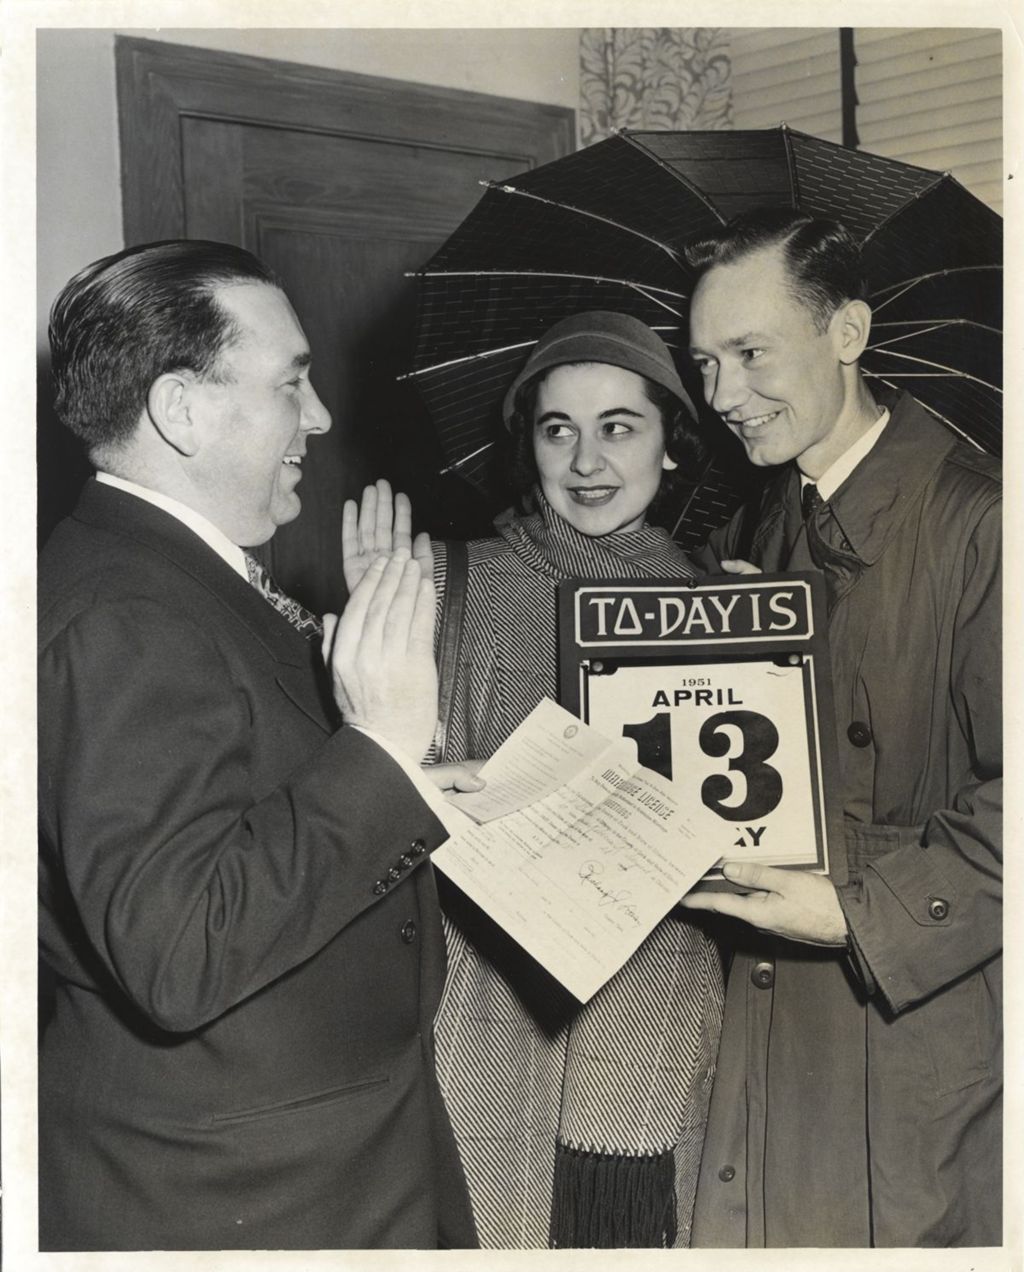 Miniature of Richard J. Daley marrying a couple on Friday the 13th